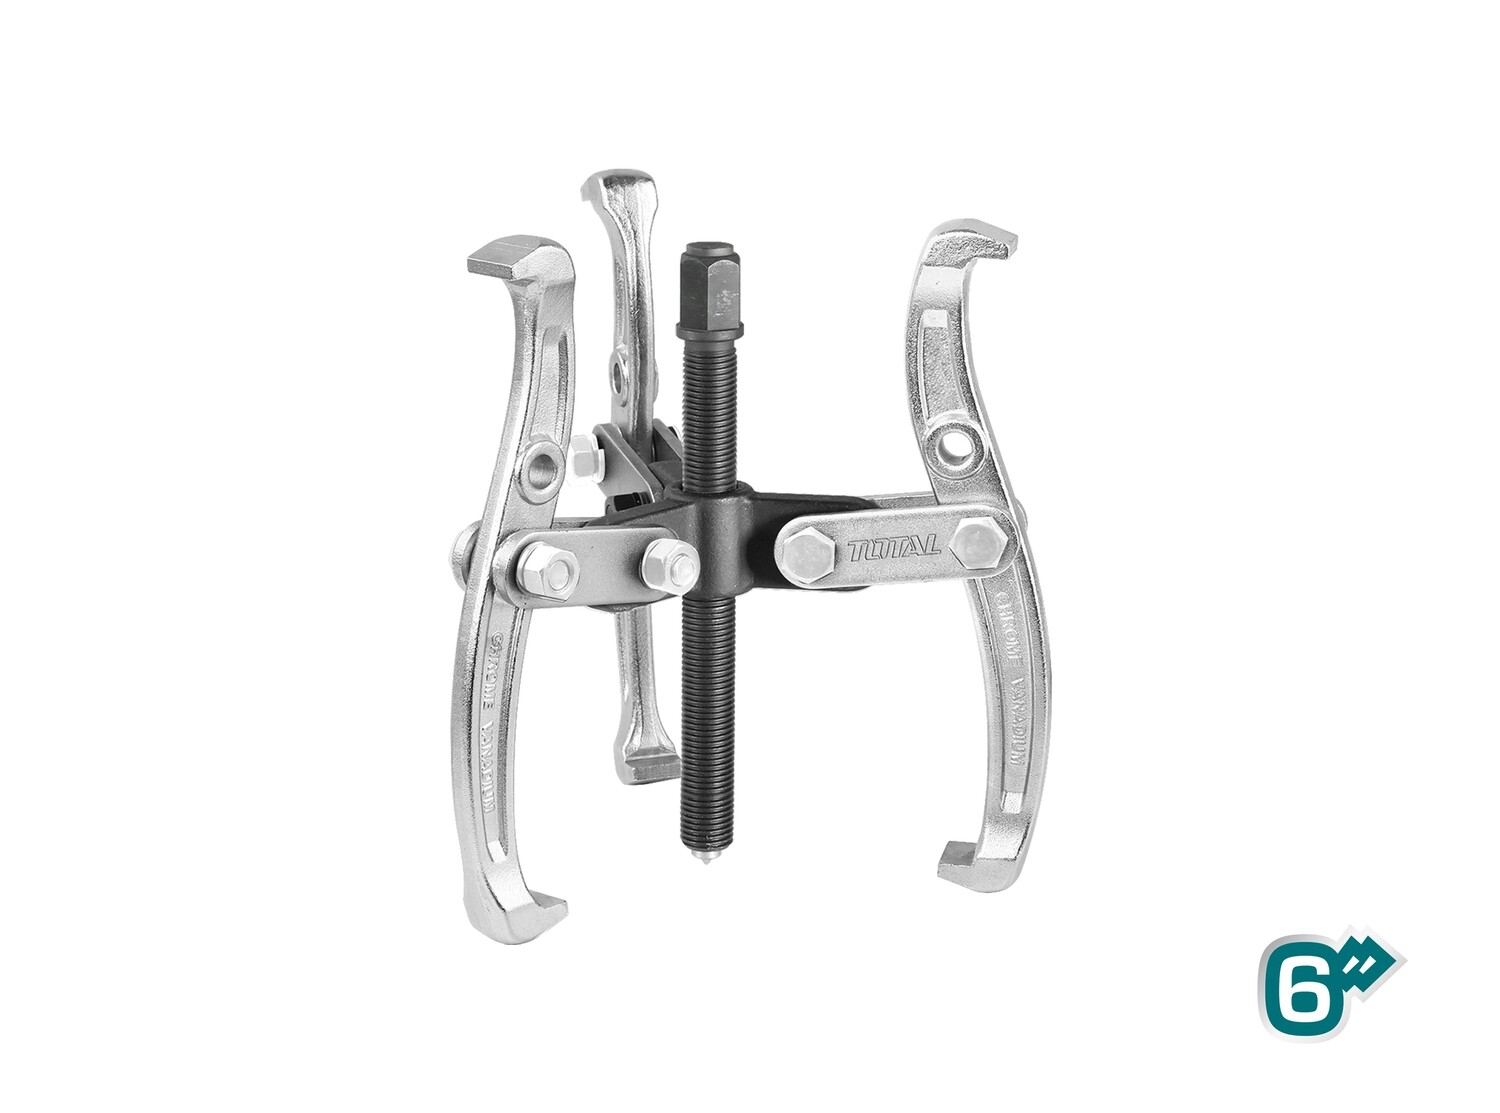 THREE JAWS PULLER 6 INCH